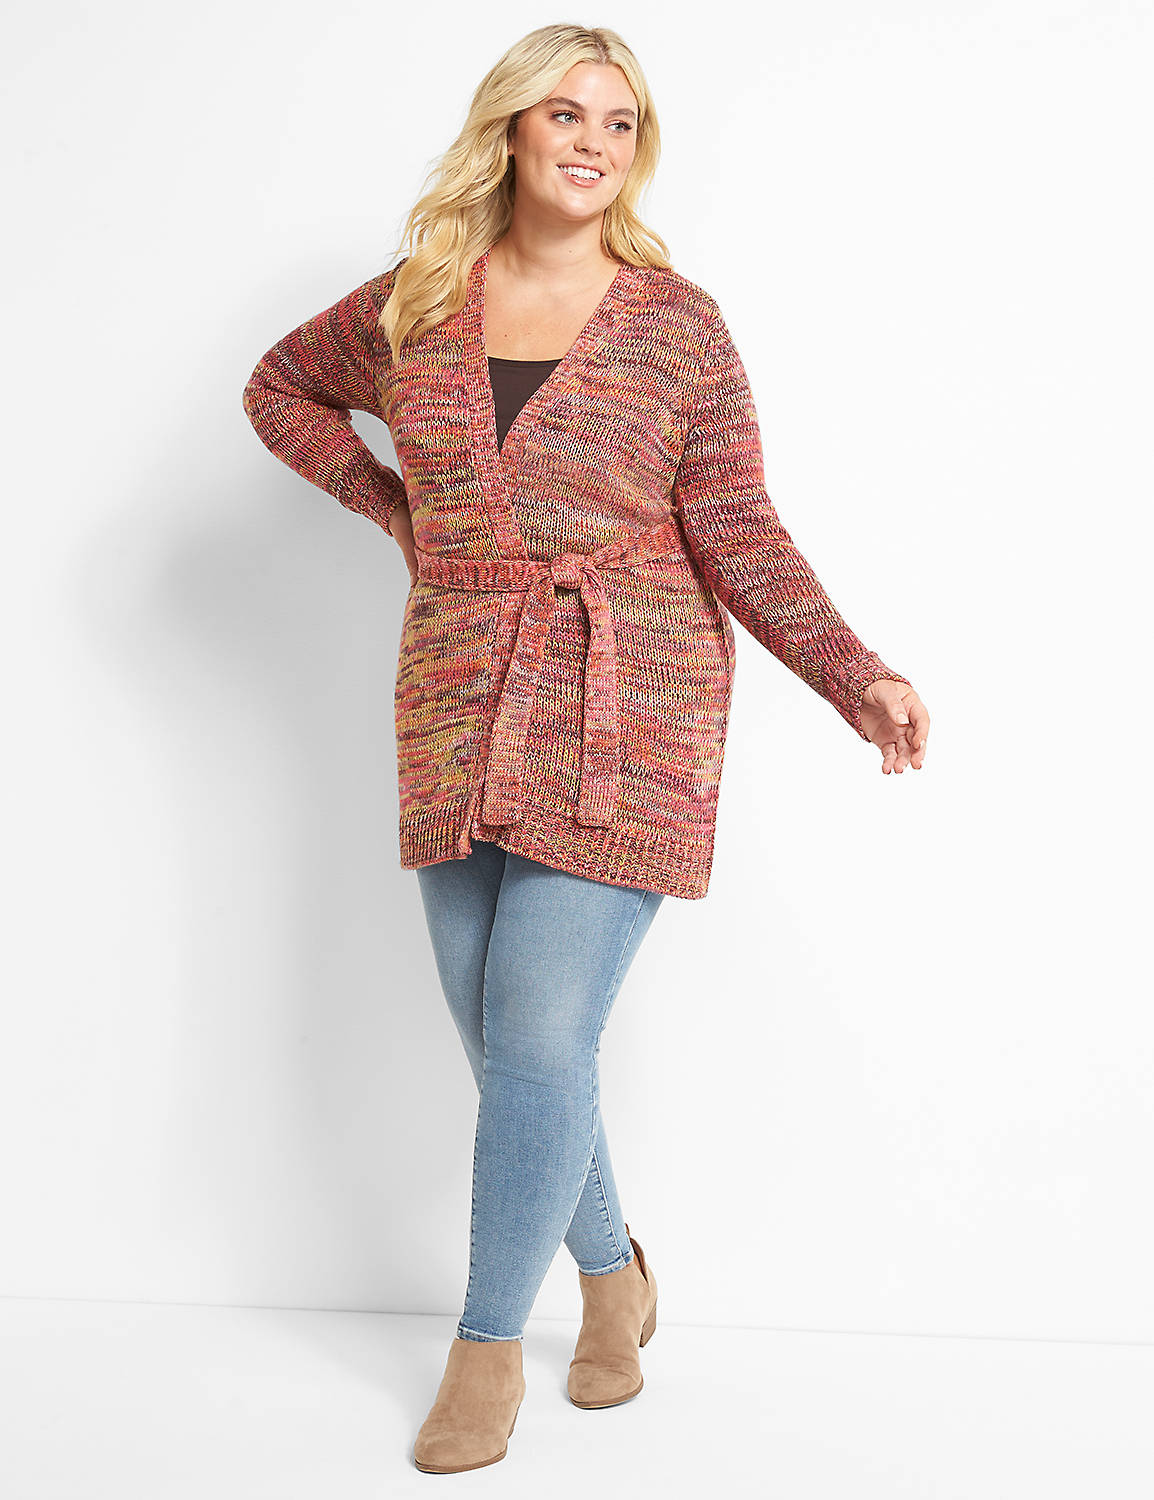 Belted Open Cardigan Product Image 3